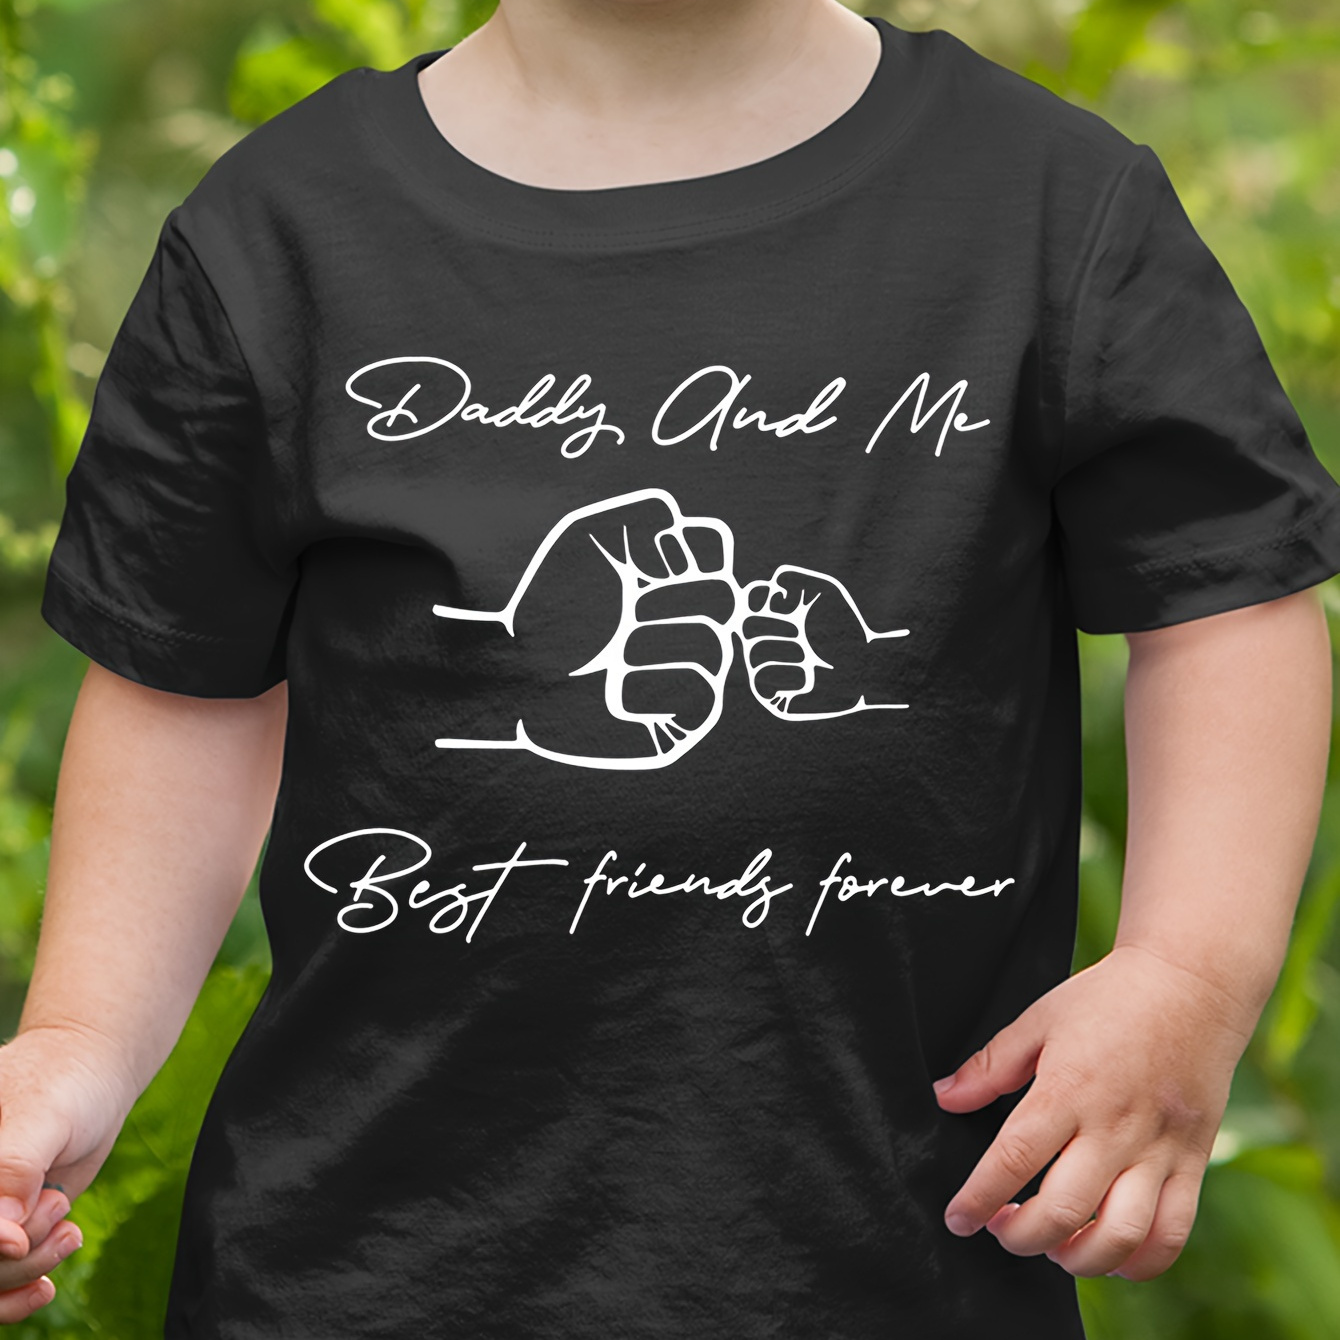 

Daddy And Me Print Boy's Casual T-shirt, Comfortable Short Sleeve Top, Boys Summer Clothing